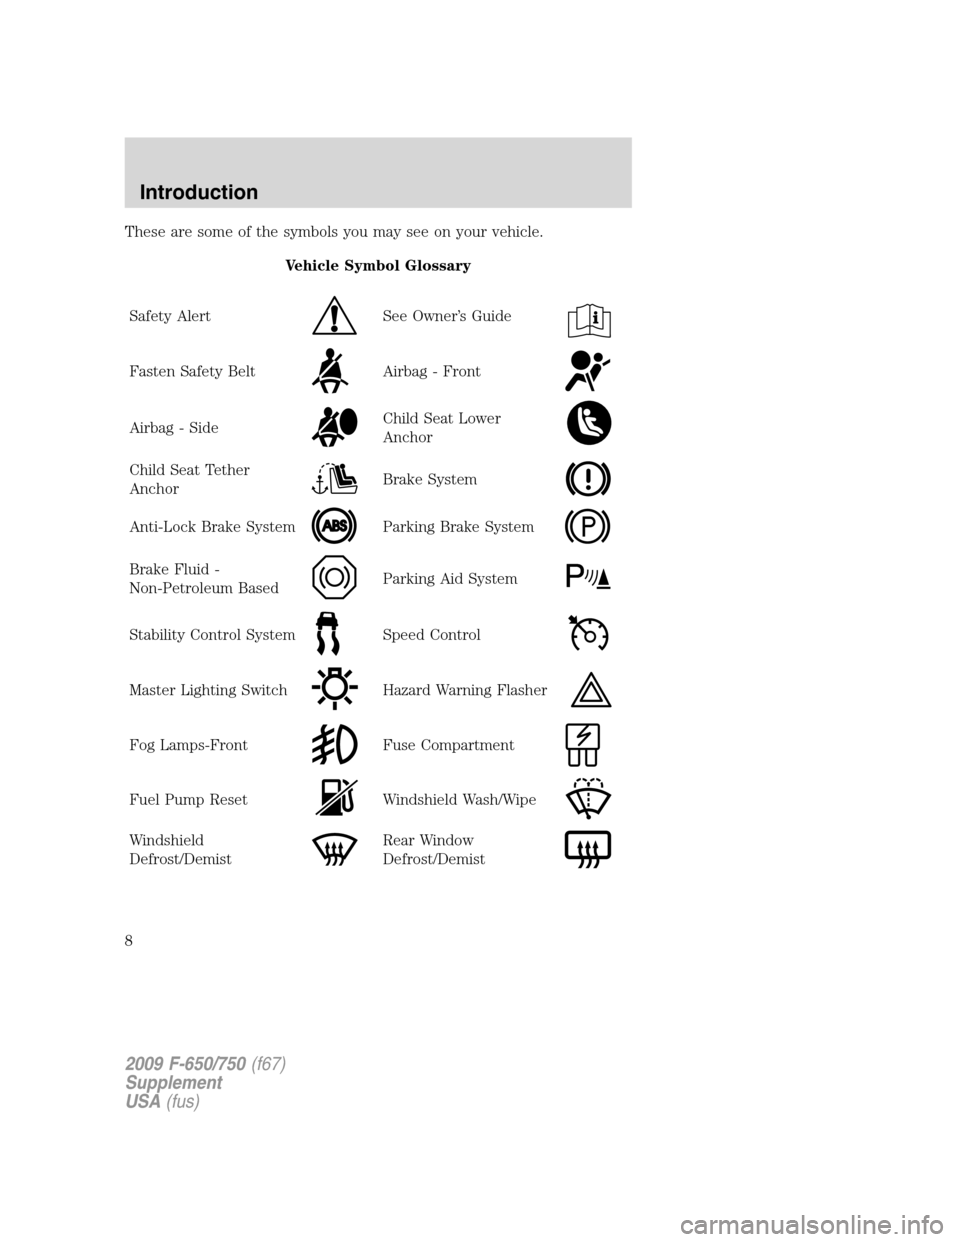 FORD F650 2009 12.G Owners Manual These are some of the symbols you may see on your vehicle.
Vehicle Symbol Glossary
Safety Alert
See Owner’s Guide
Fasten Safety BeltAirbag - Front
Airbag - SideChild Seat Lower
Anchor
Child Seat Tet